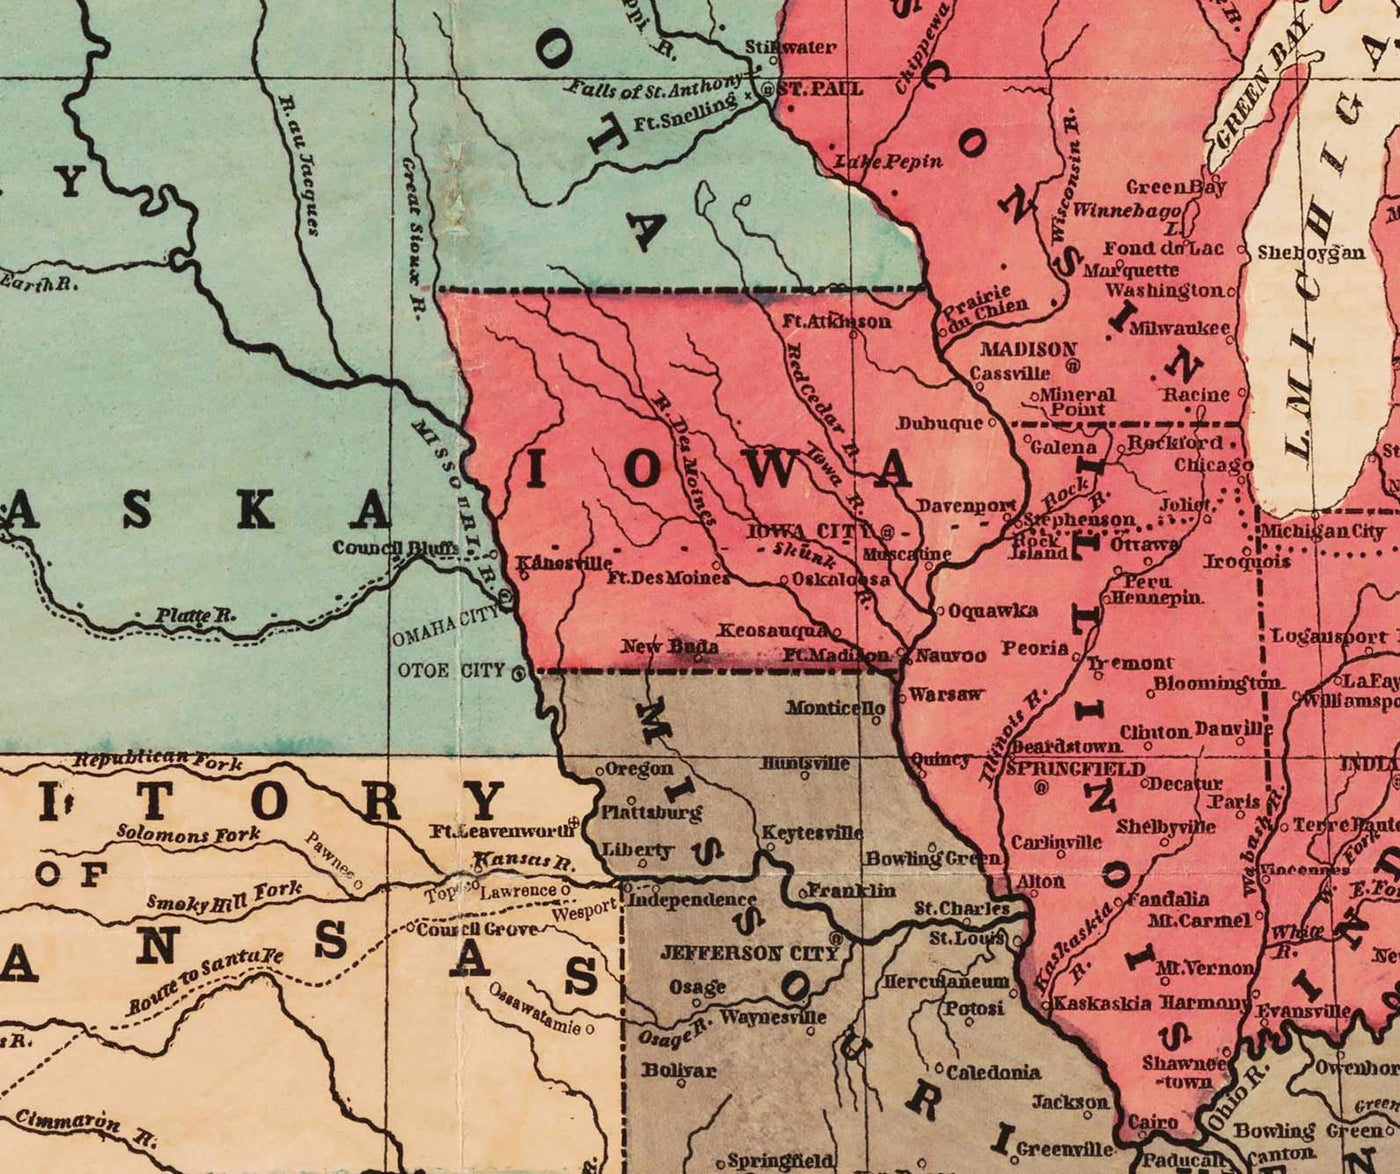 Old Political Map of the USA, 1856 - American Civil War Free vs. Slate States, North vs. South - Missouri Compromise